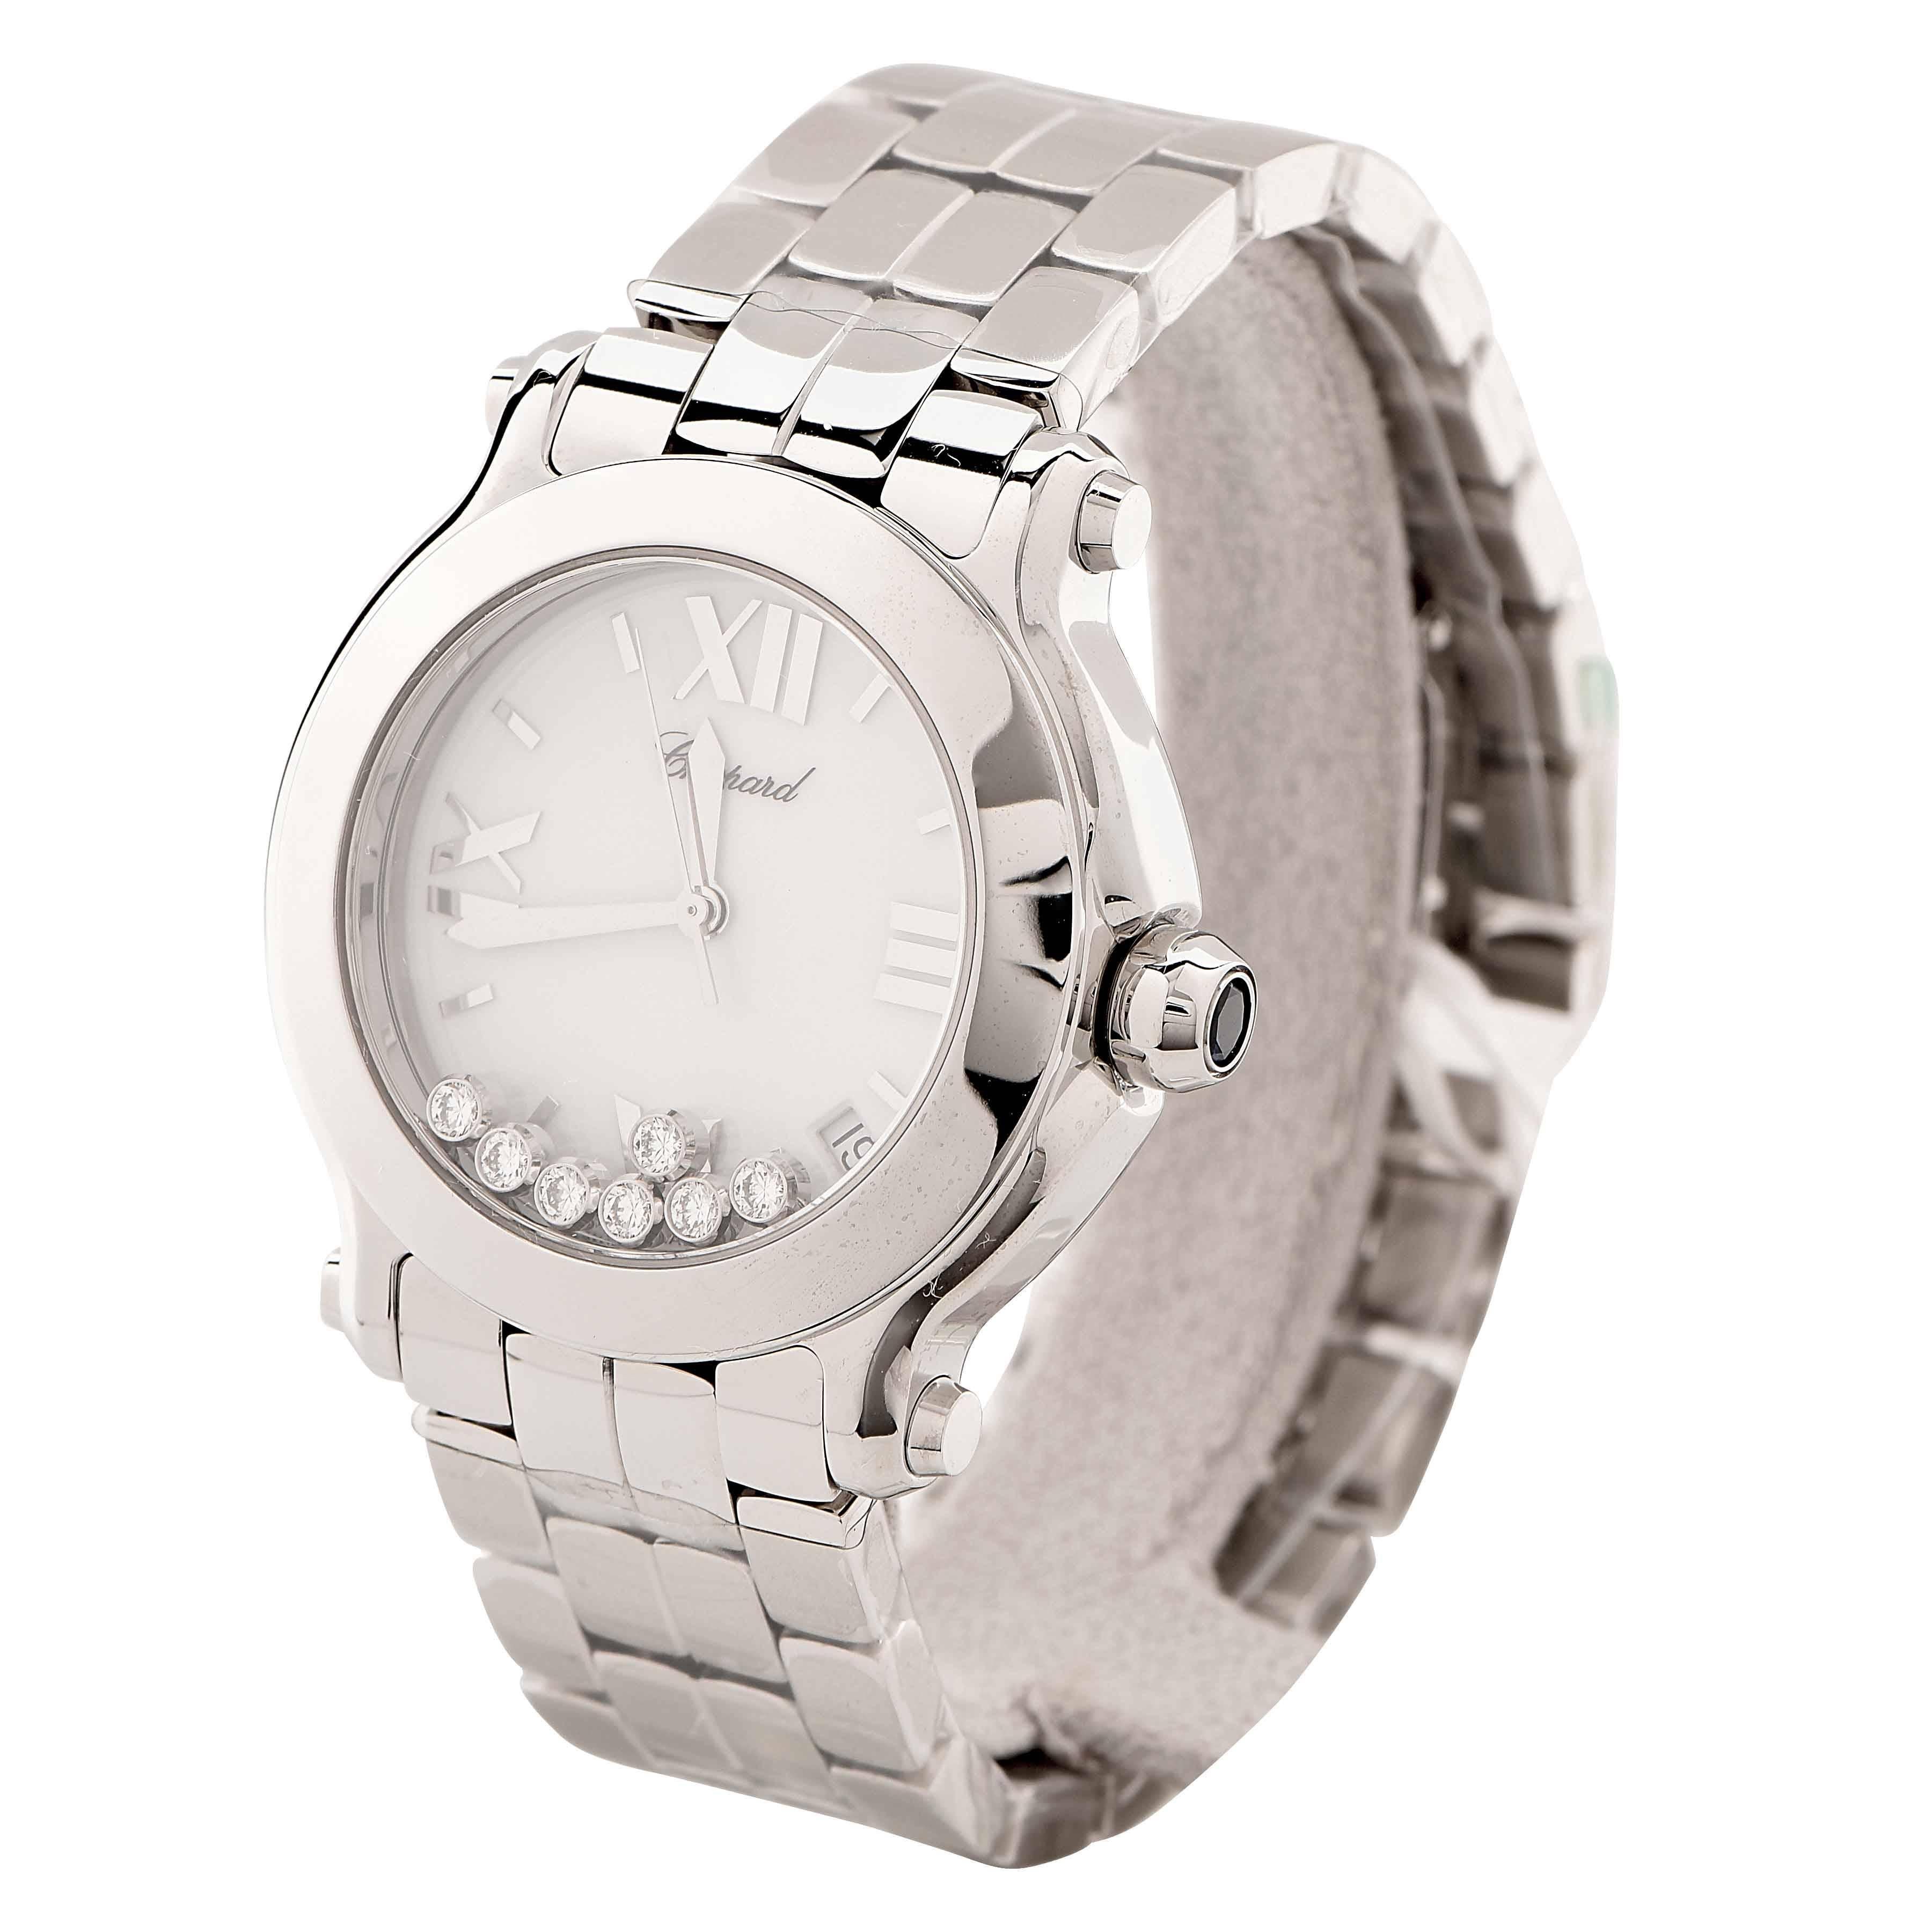 This New with Box and Papers Happy Sport 36 mm watch in stainless steel is a unique blend of watchmaking refinement and a contemporary, sporty design, giving this watch power and style. The generously proportioned bezel frames the moving diamonds as